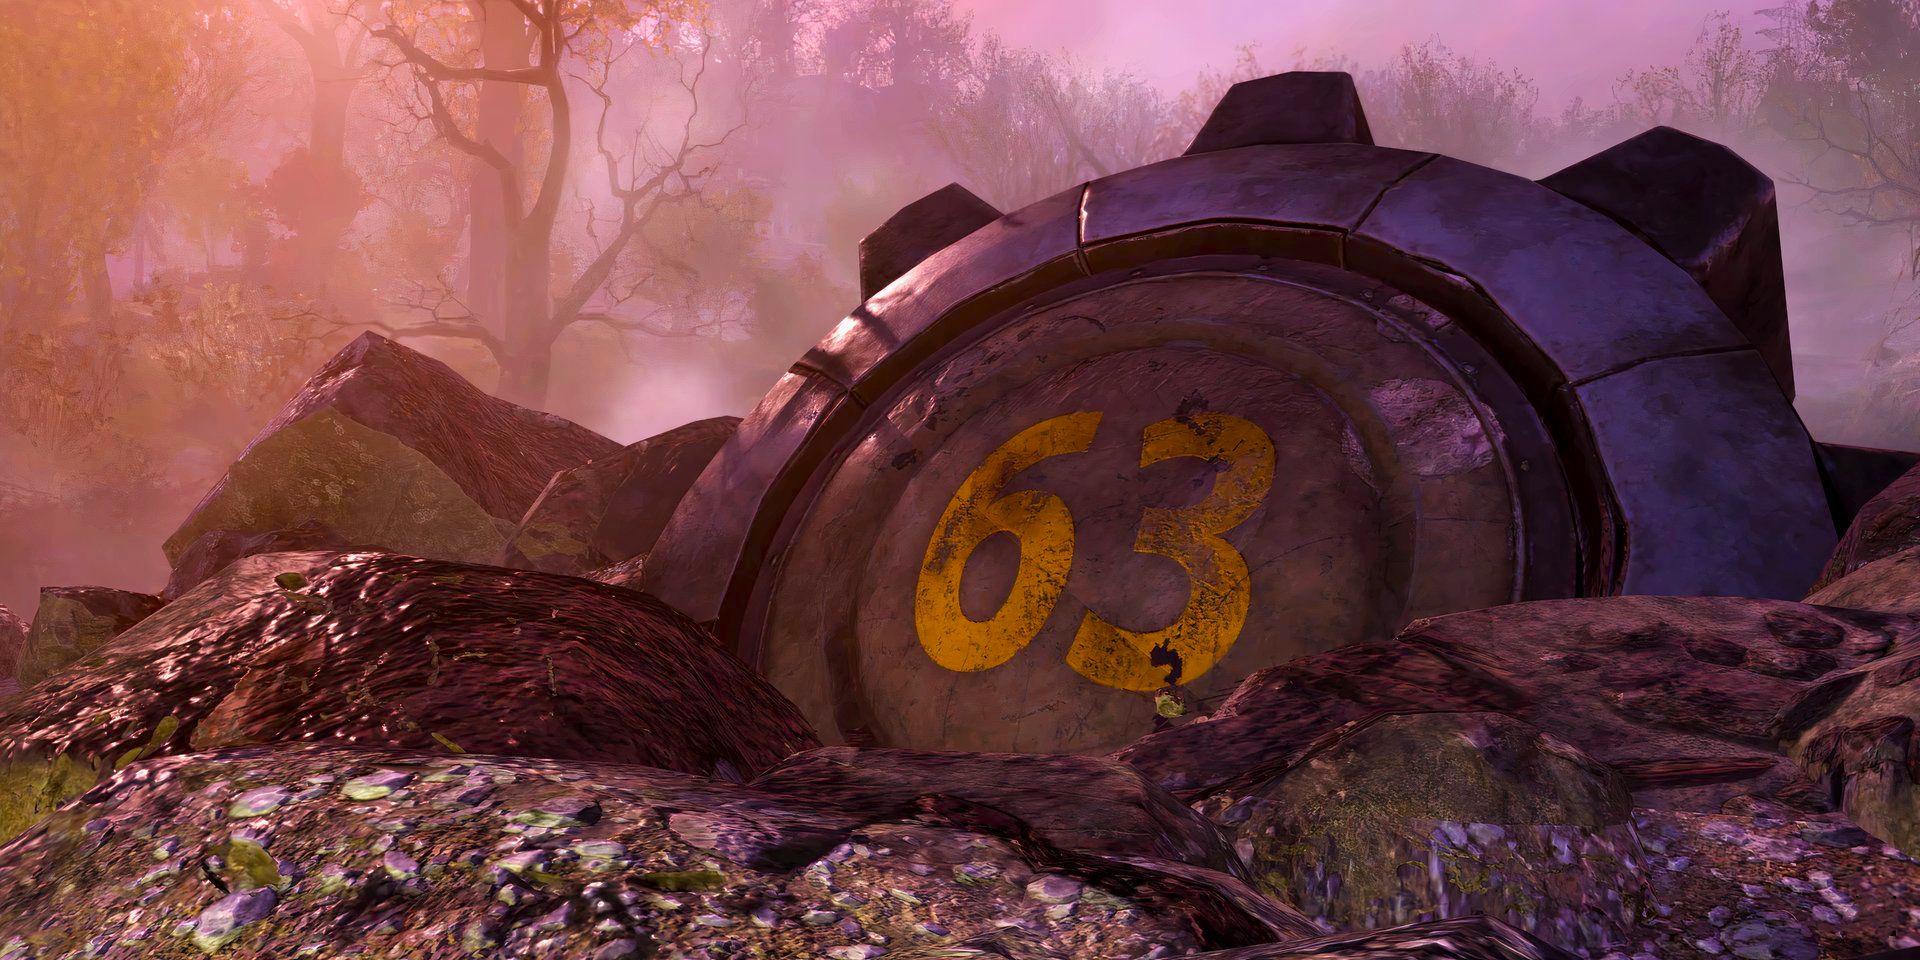 The Skyline Valley update brings new content and features to Fallout 76